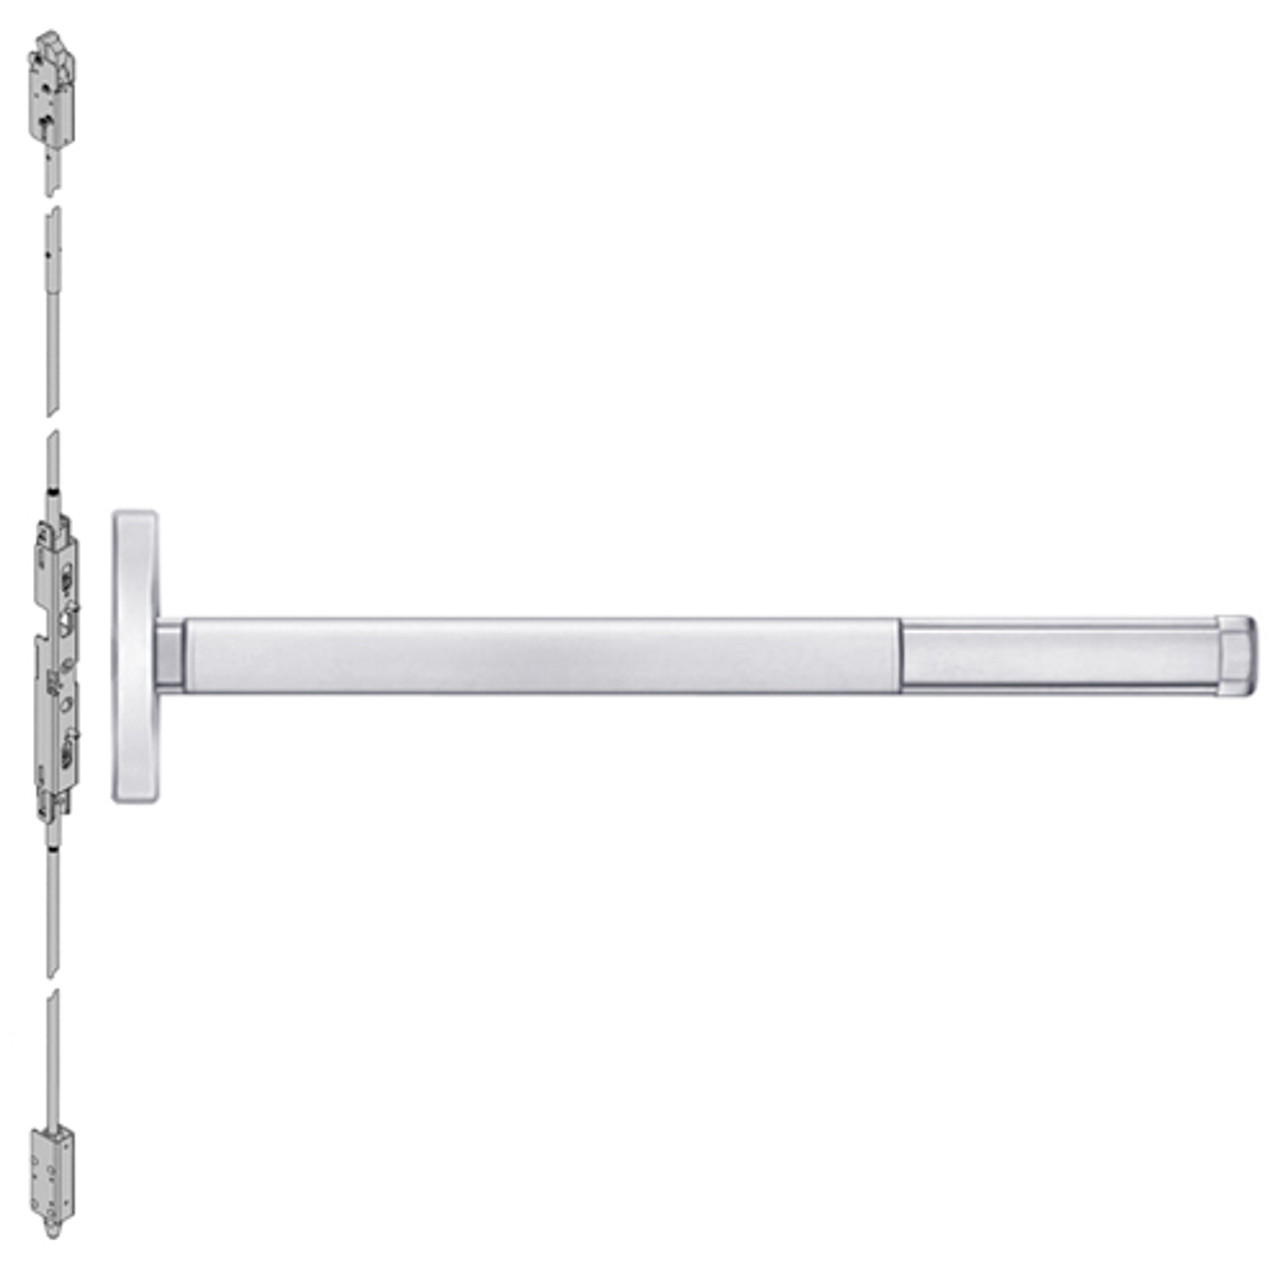 ELRFL2614-625-36 PHI 2600 Series Fire Rated Concealed Vertical Rod Exit Device with Electric Latch Retraction Prepped for Lever Always Active in Bright Chrome Finish